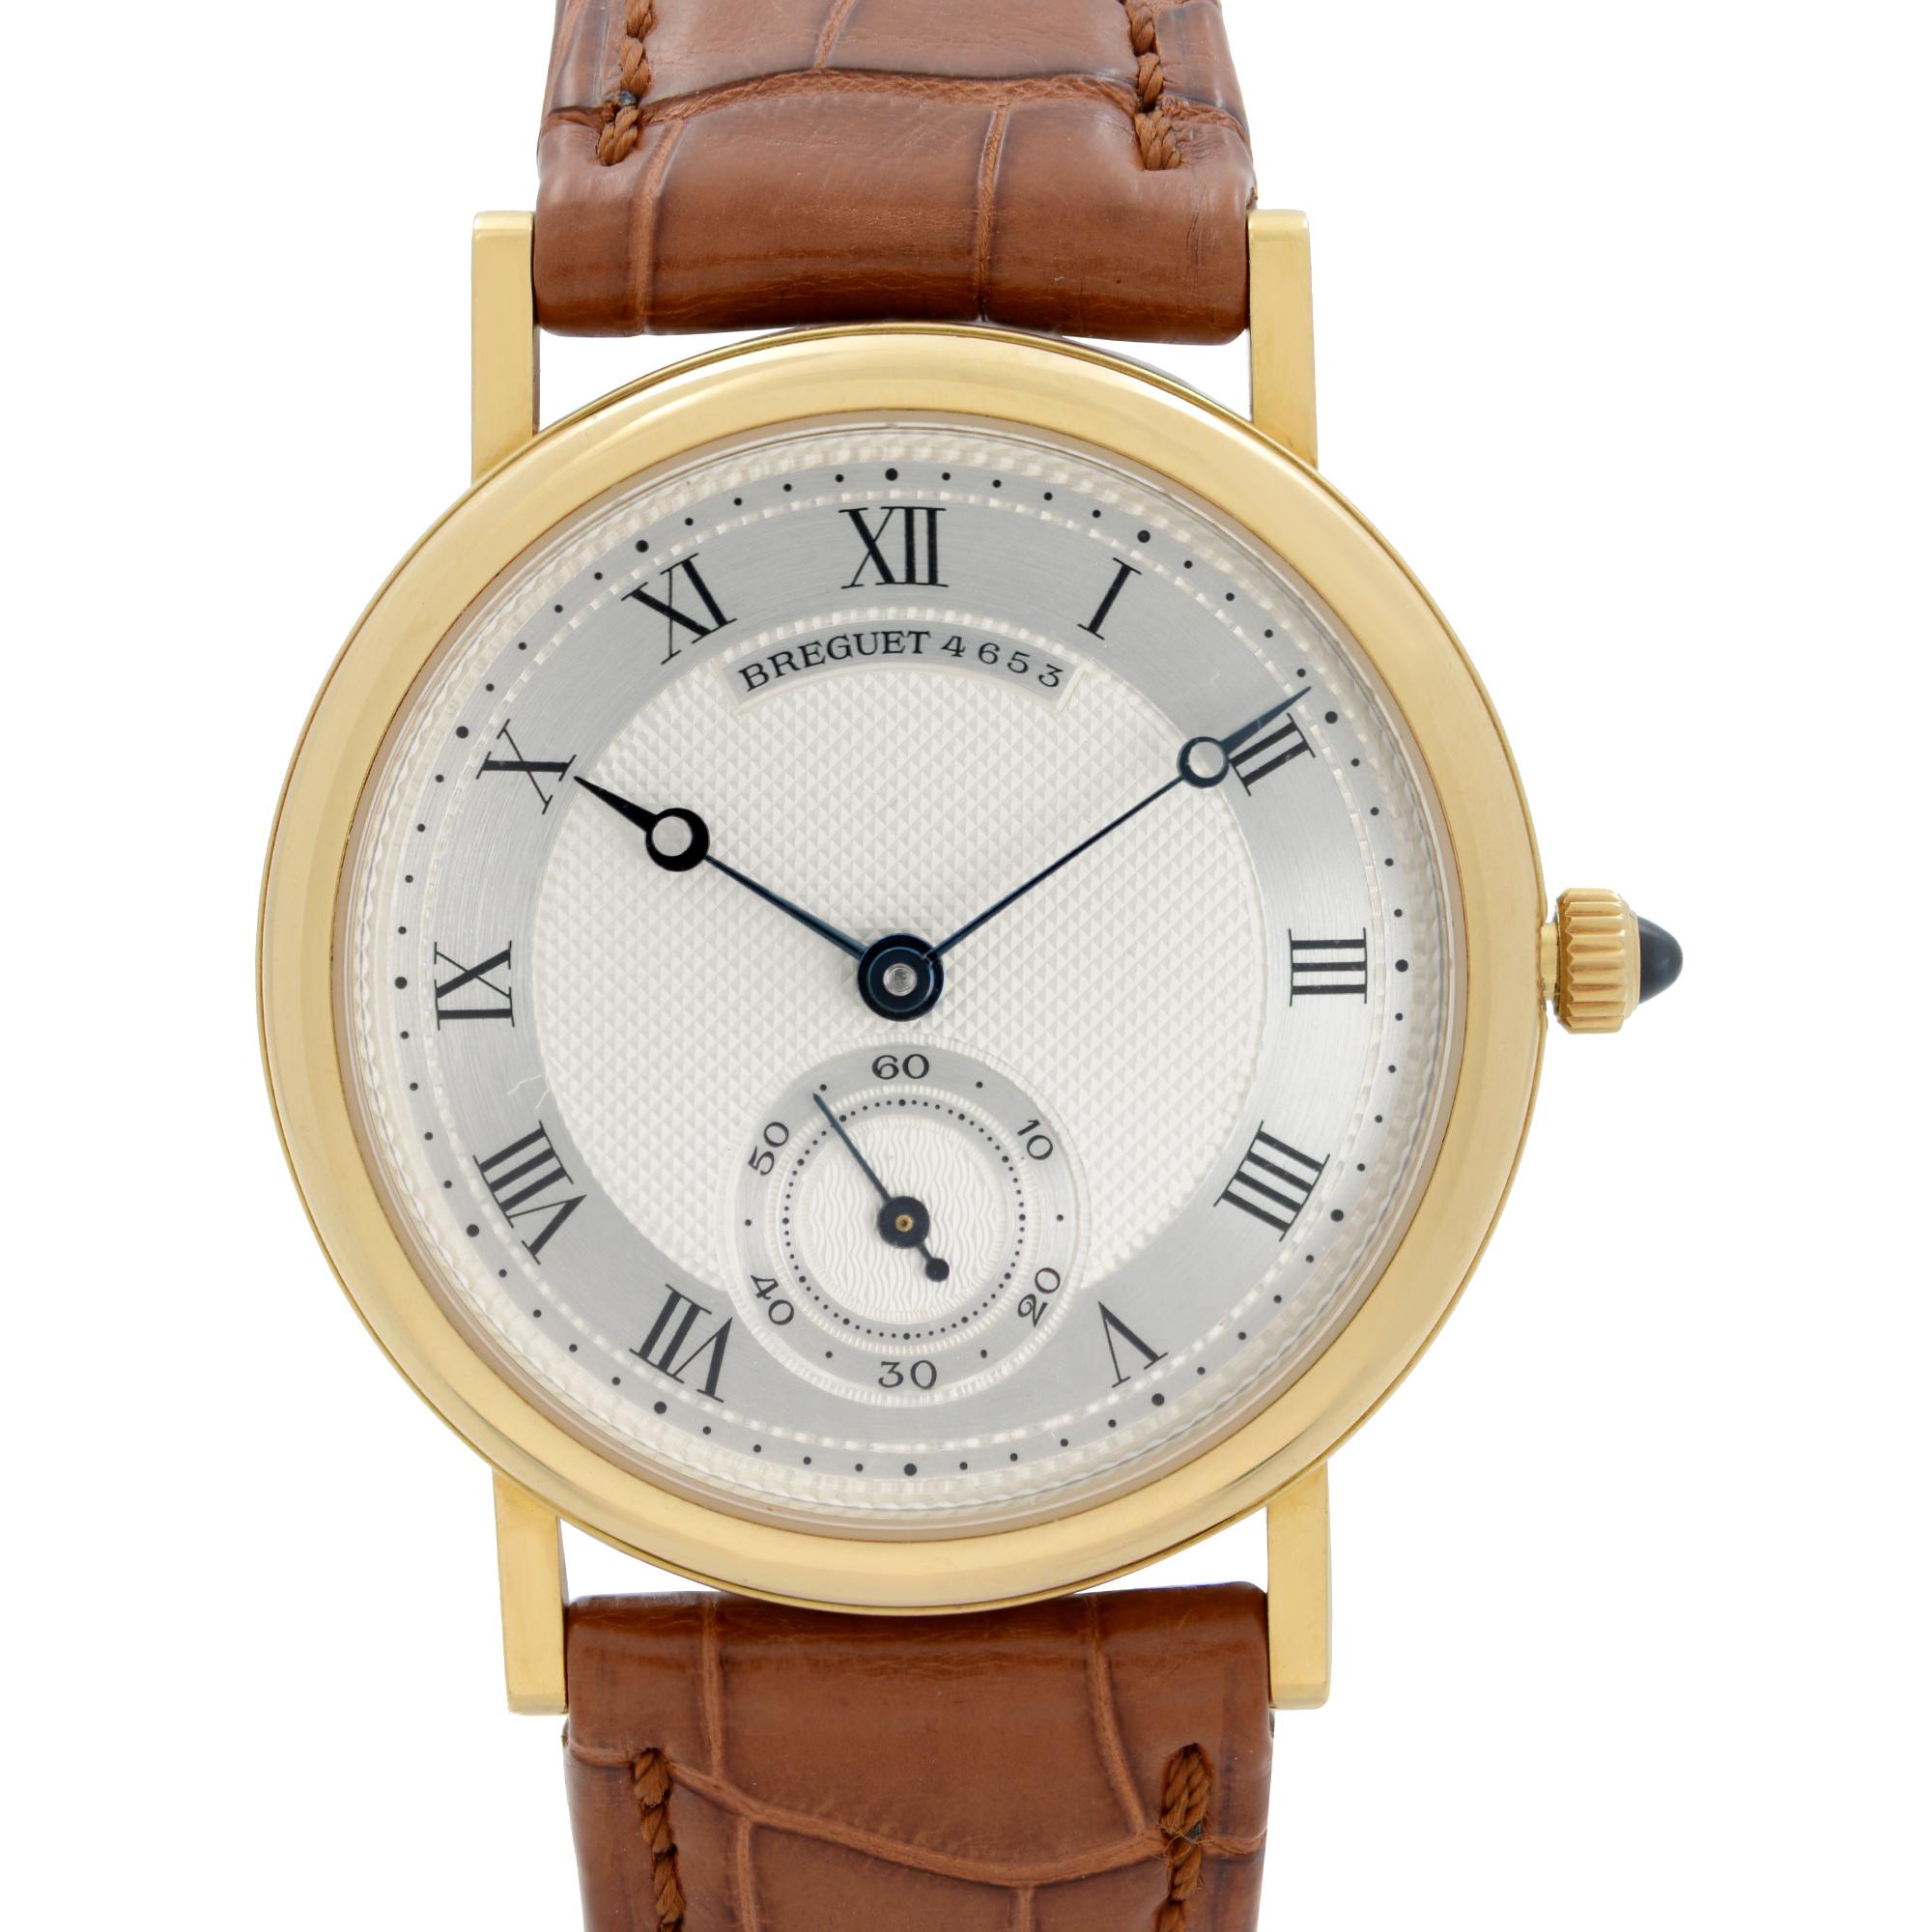 Pre-Owned Breguet Classique 32 mm 18k Yellow Gold Silver Dial Men's Hand-wind Watch 3290. The Watch is powered by an Automatic Movement and Features: Polished 18k Yellow Gold Round Case and Two-Piece Leather Strap. Fixed Gold Bezel. Silver Guilloche